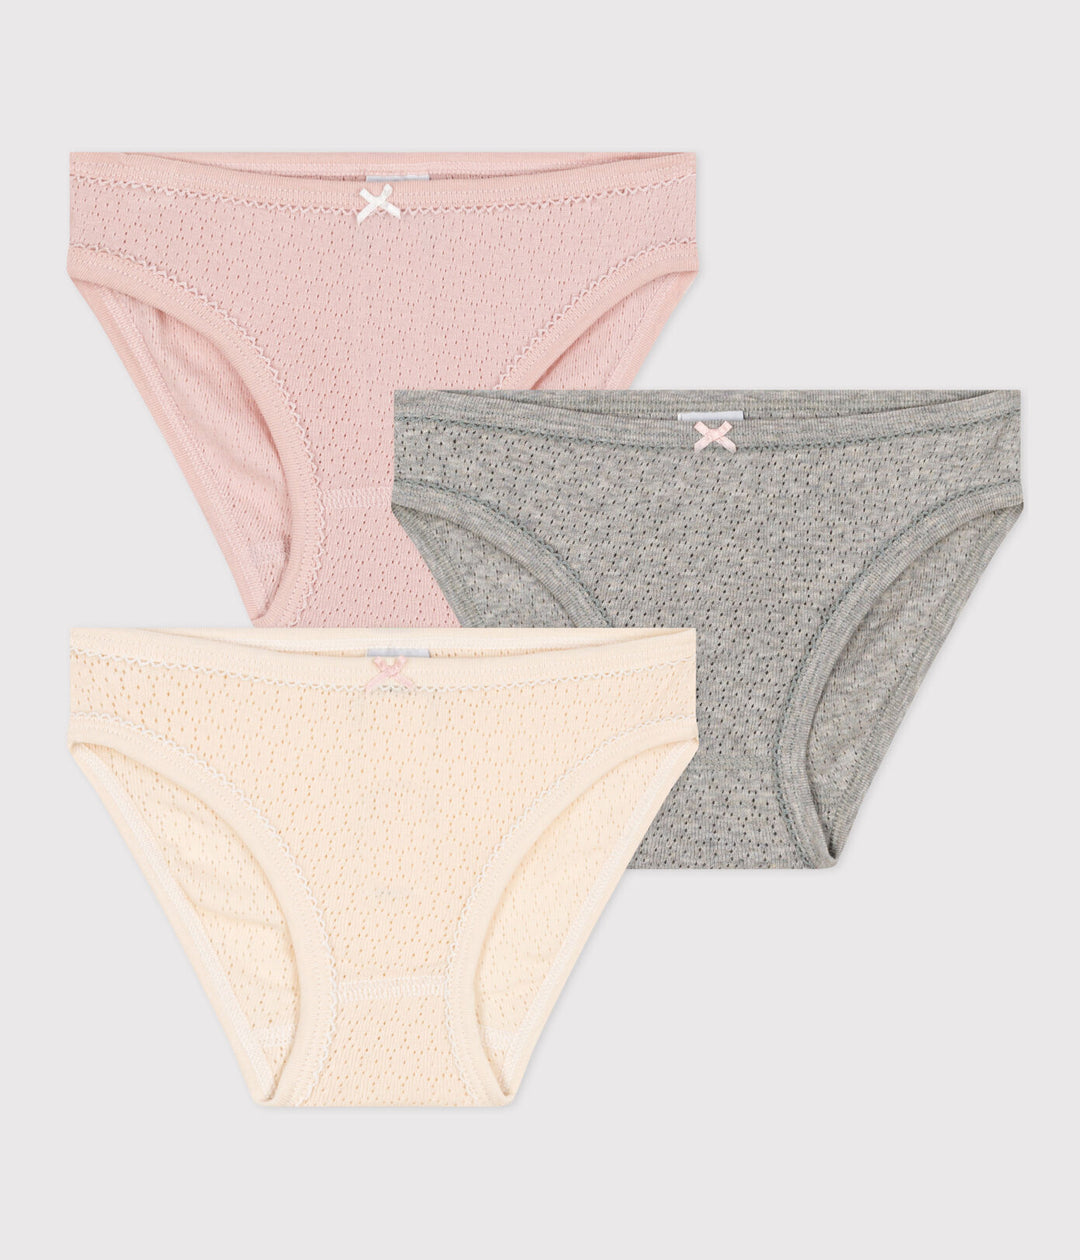 Slip Bow Yellow / Pink / Grey Variante 1 (3pack)